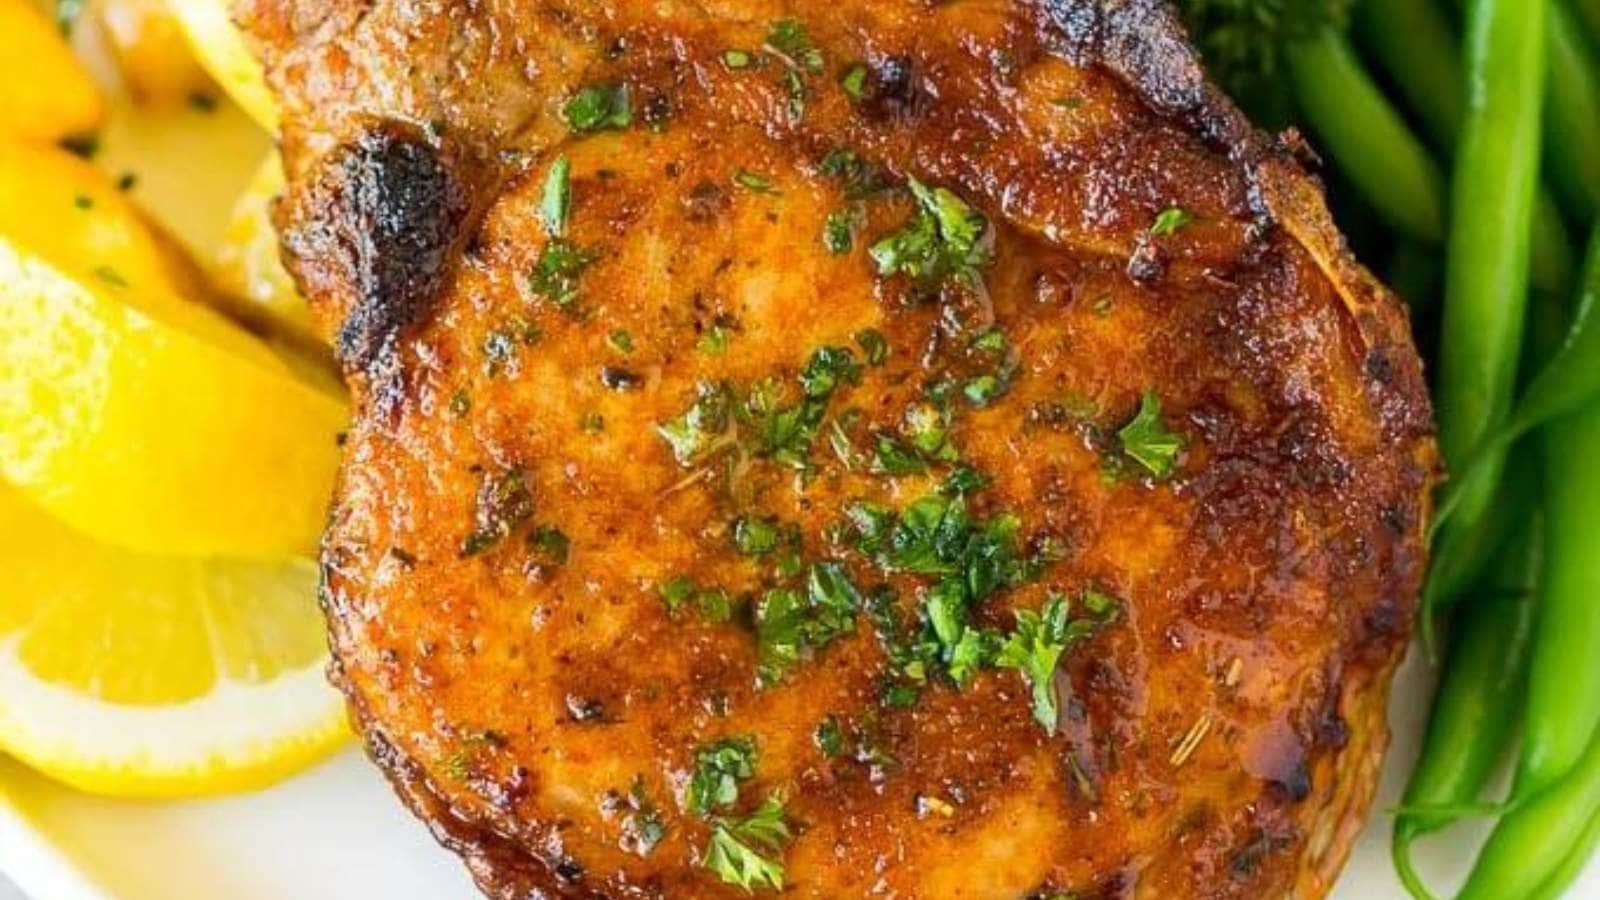 Air Fryer Pork Chops recipe by Dinner At The Zoo.
